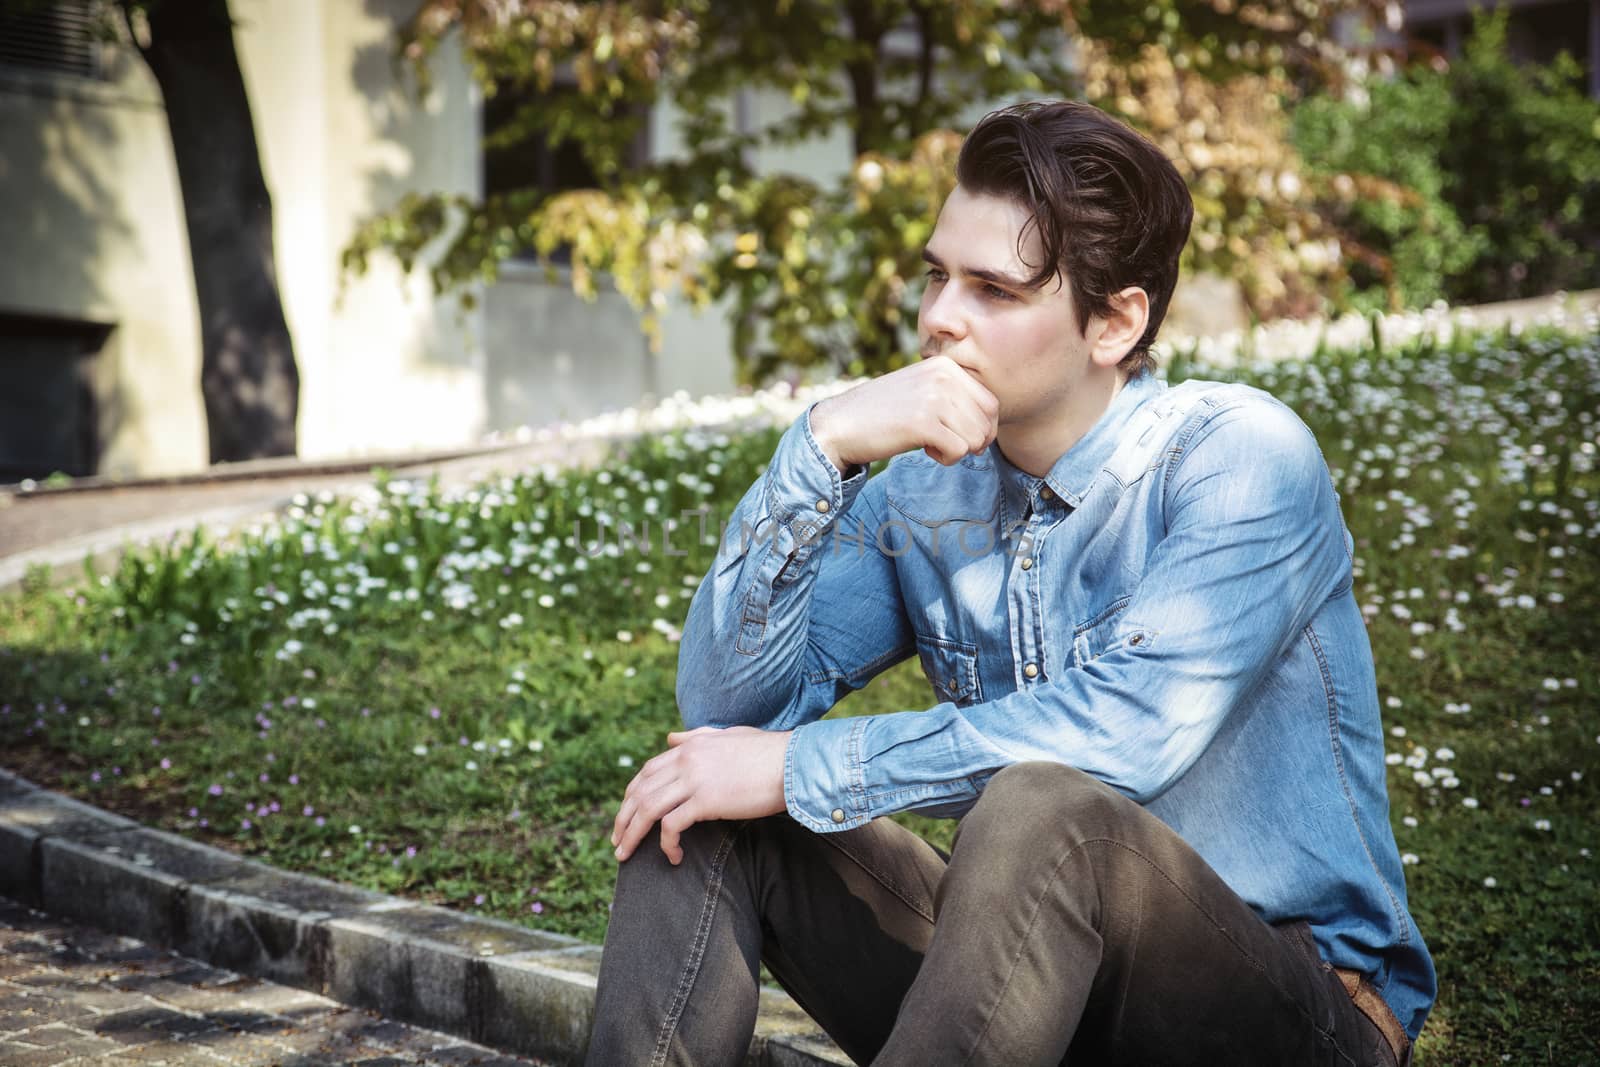 Young man sitting outdoors in public park, with hand on his chin looking away thinking